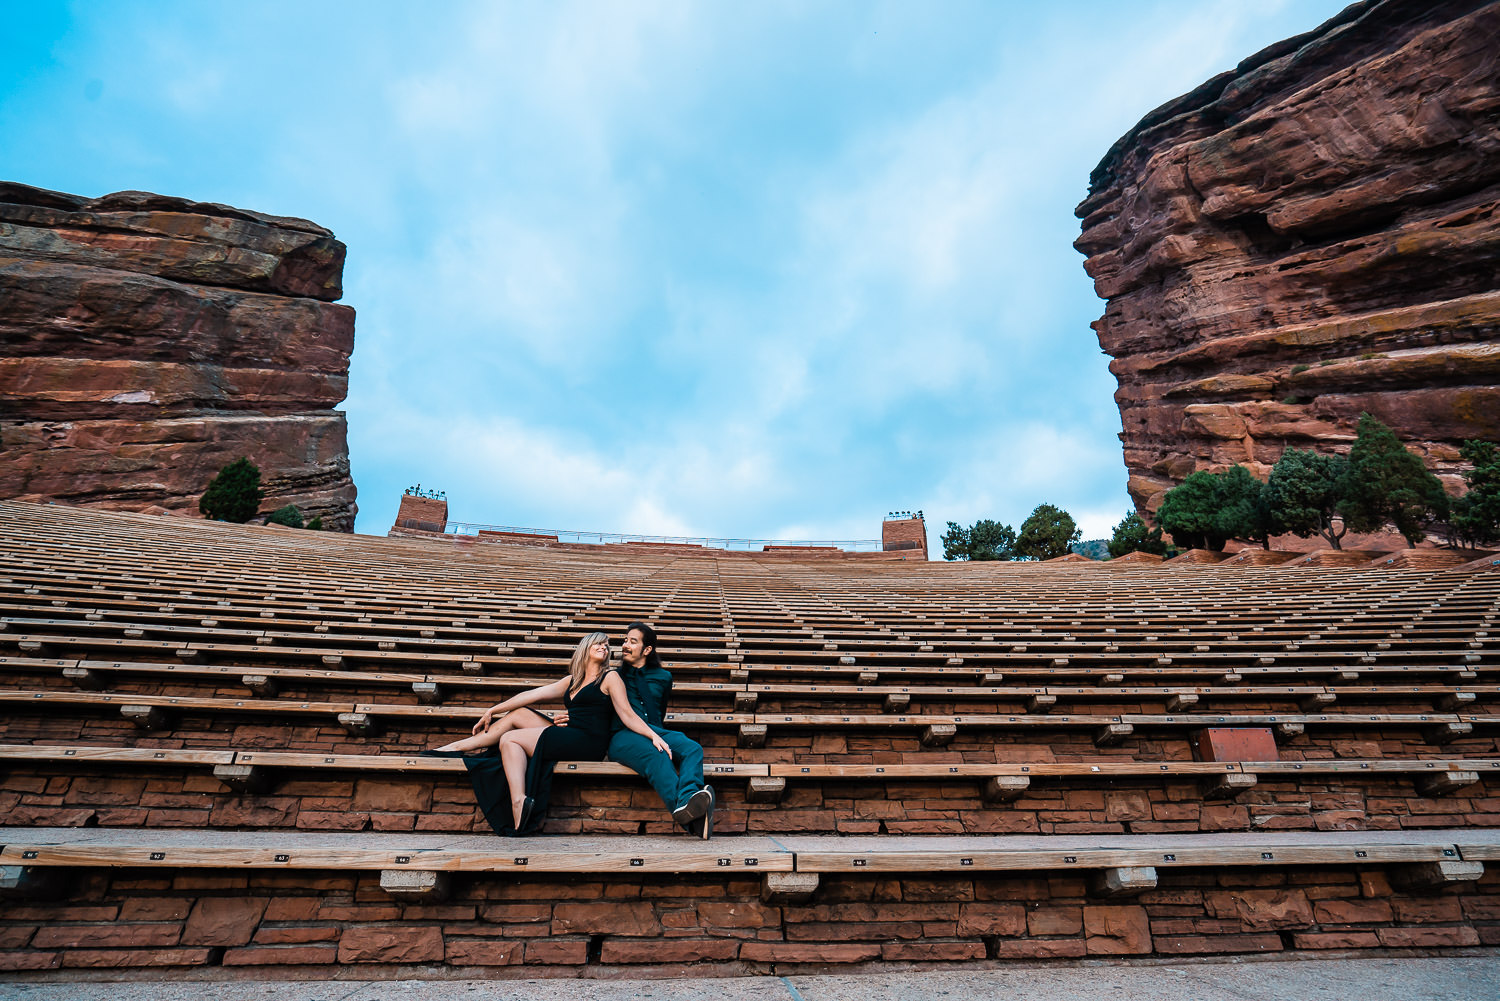 A newly engaged couple sits in the middle of an empty Red Rocks Amphitheater near Denver beneath a blue sky with puffy white clouds.